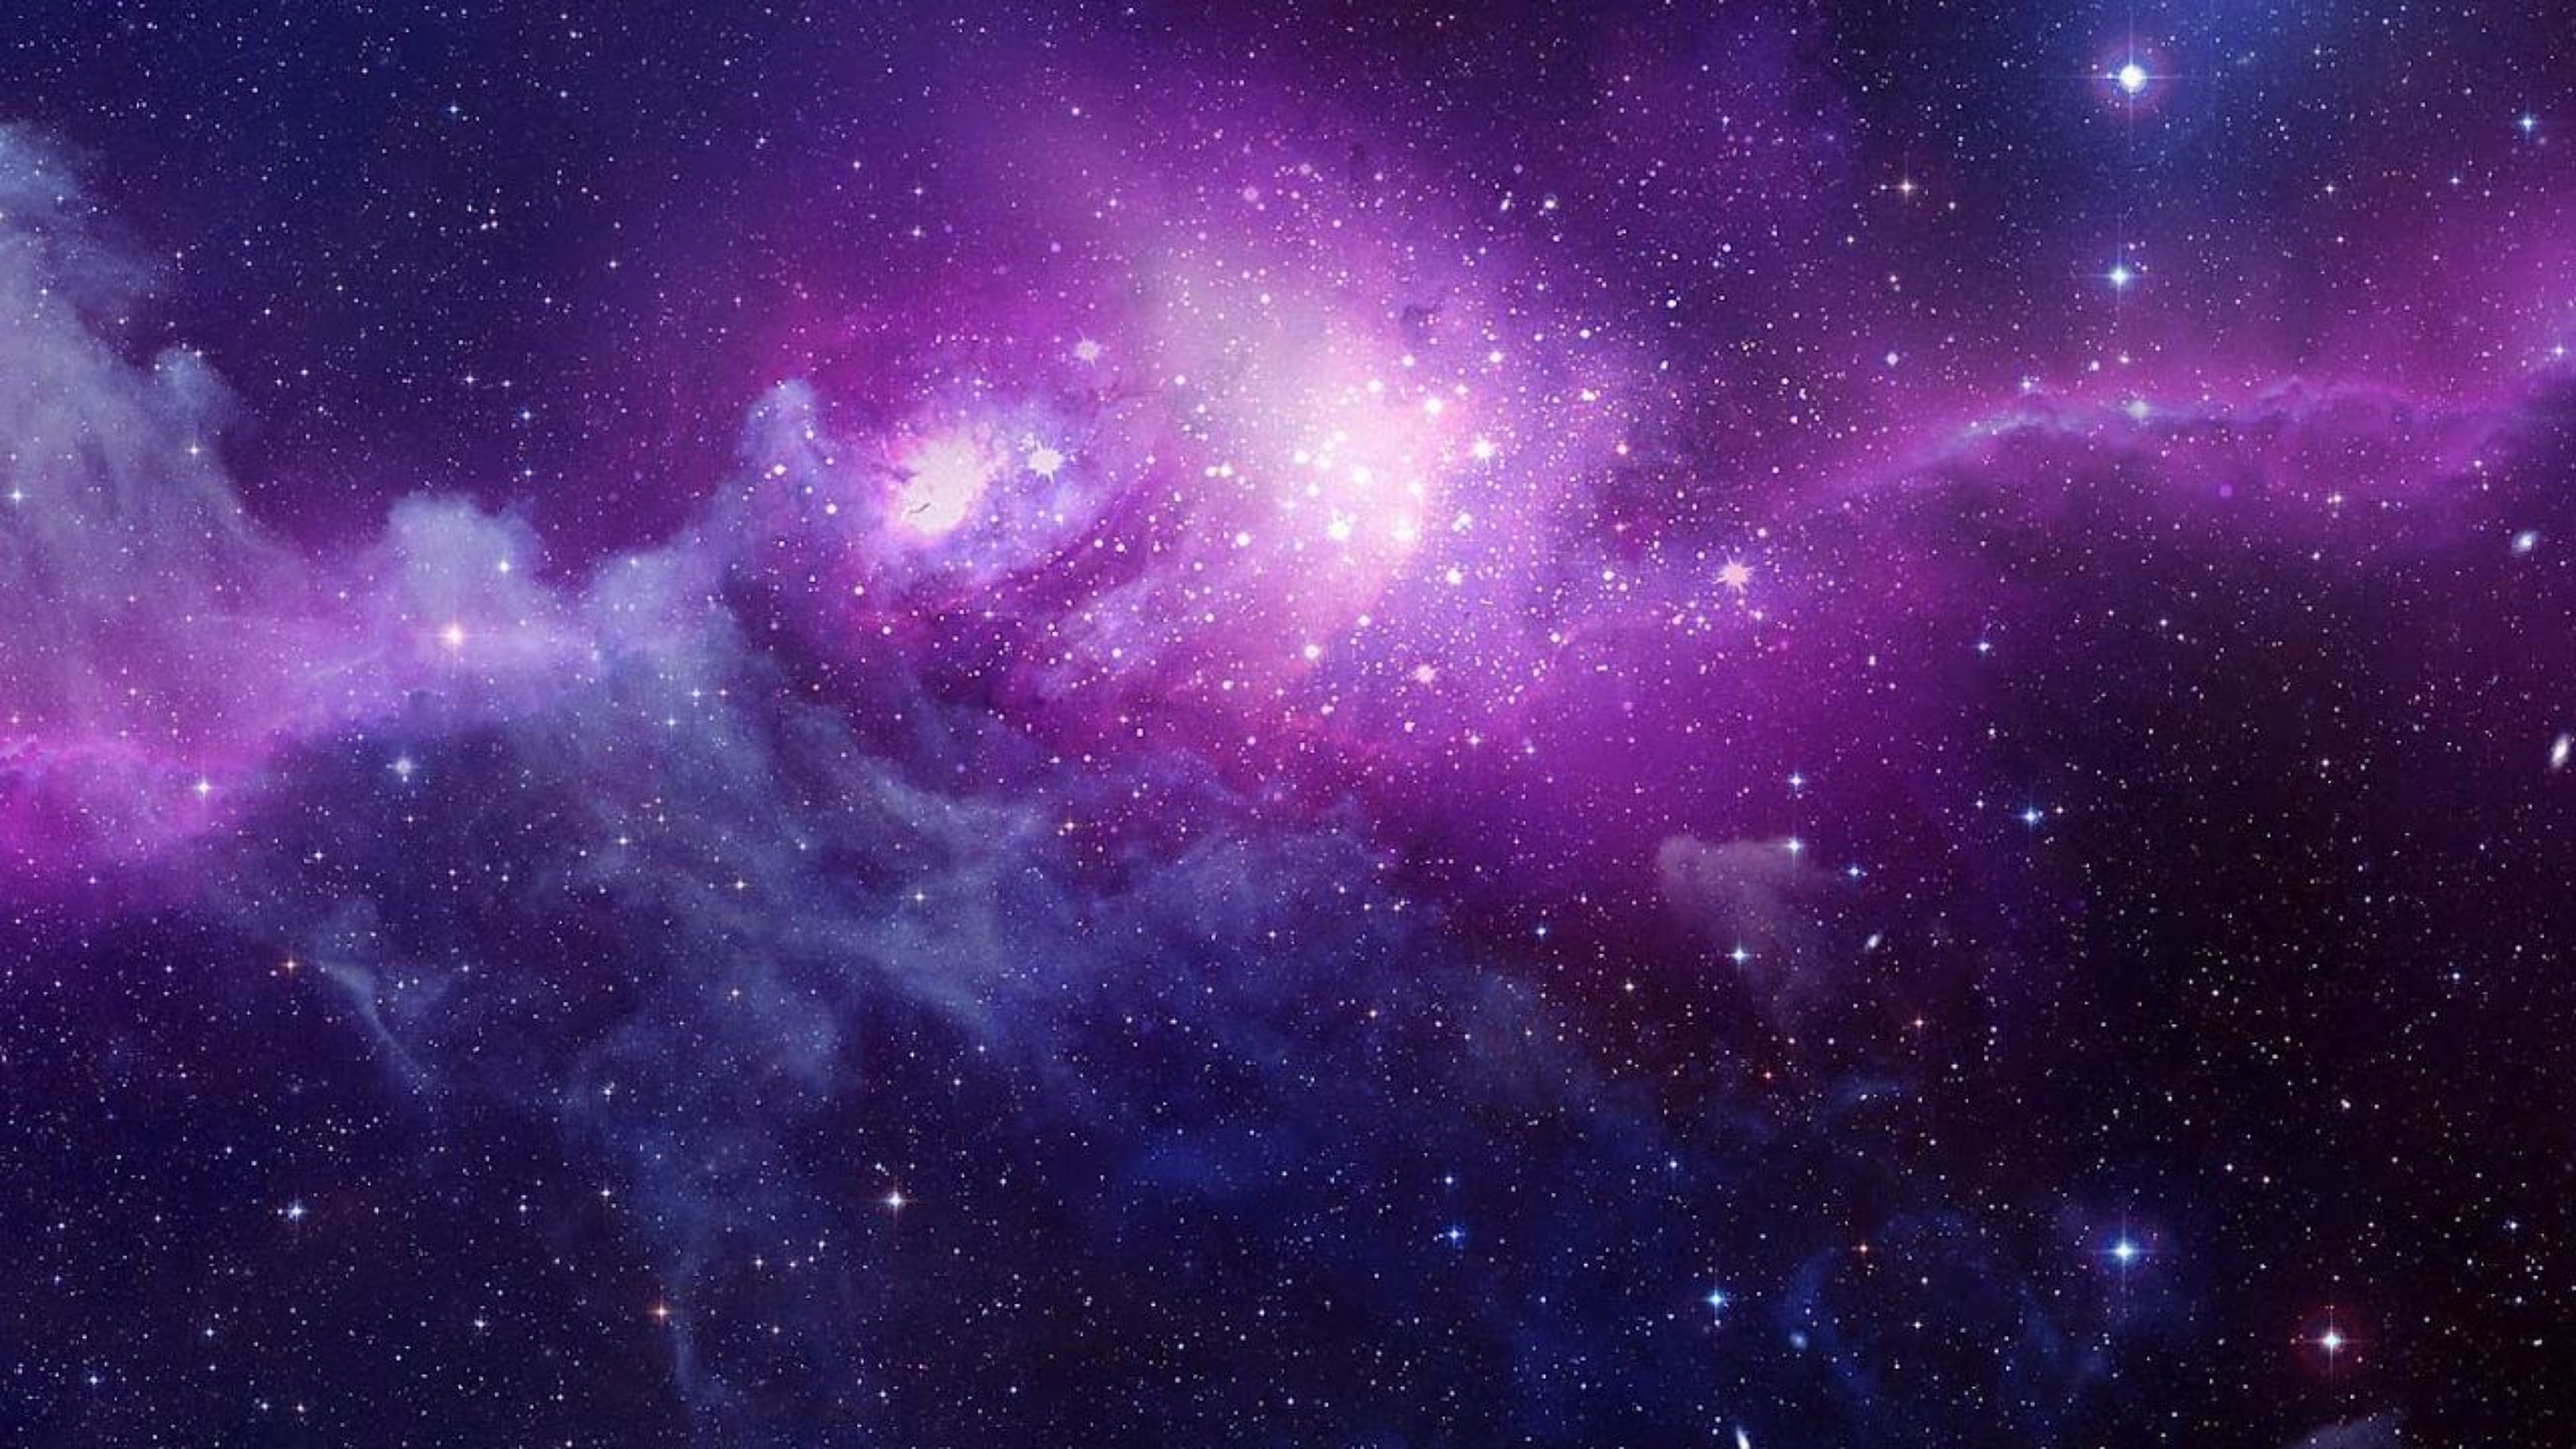 3840x2160  4K Space Wallpapers are the best... Here is a few I like